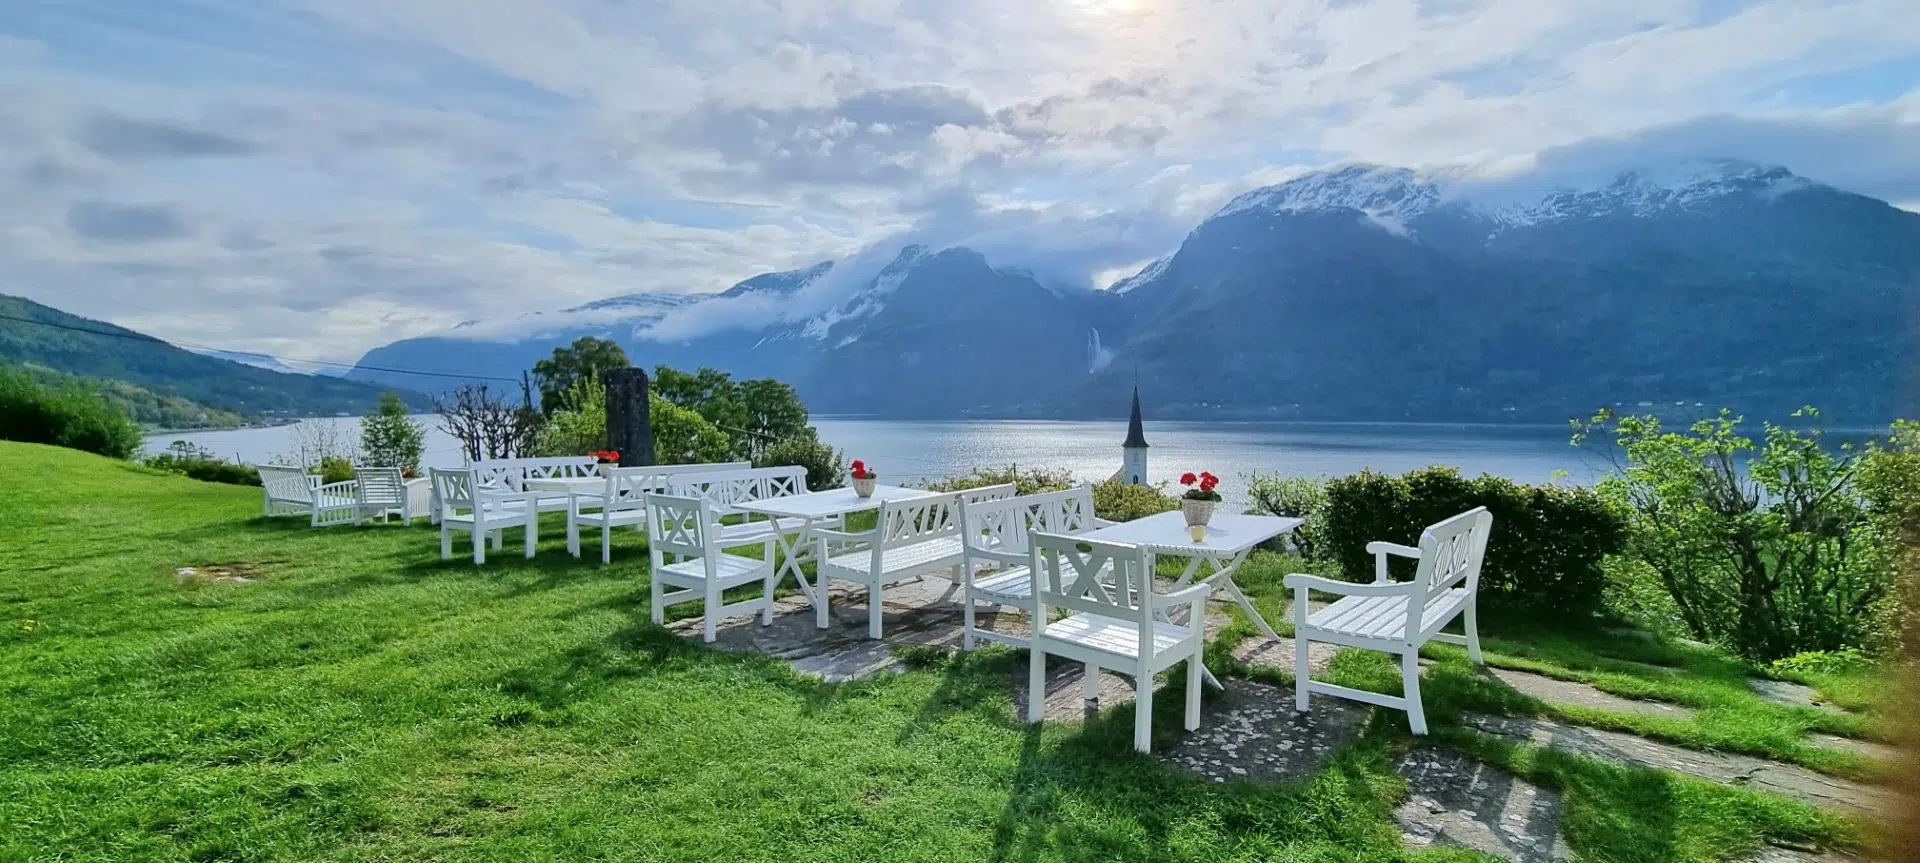 Enjoy a scenic picnic spot in Norway